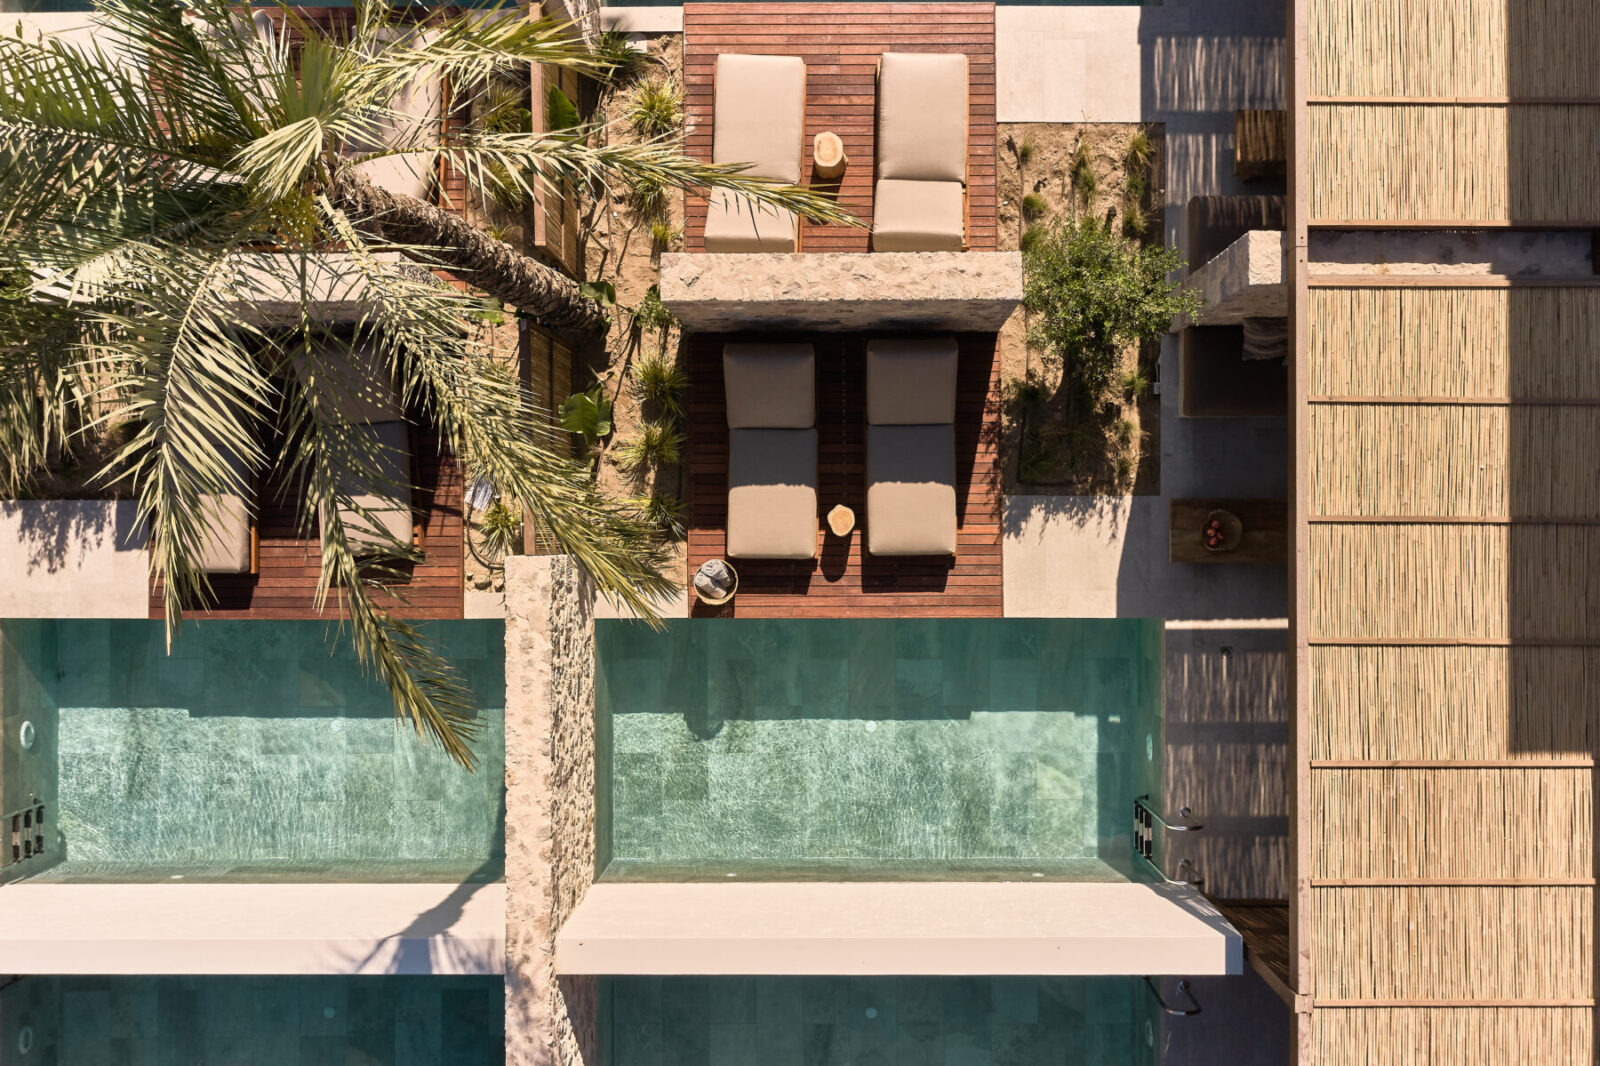 Archisearch THEROS All Suite Hotel in Kos, Dodecanese islands, Greece | Mastrominas Architecture 